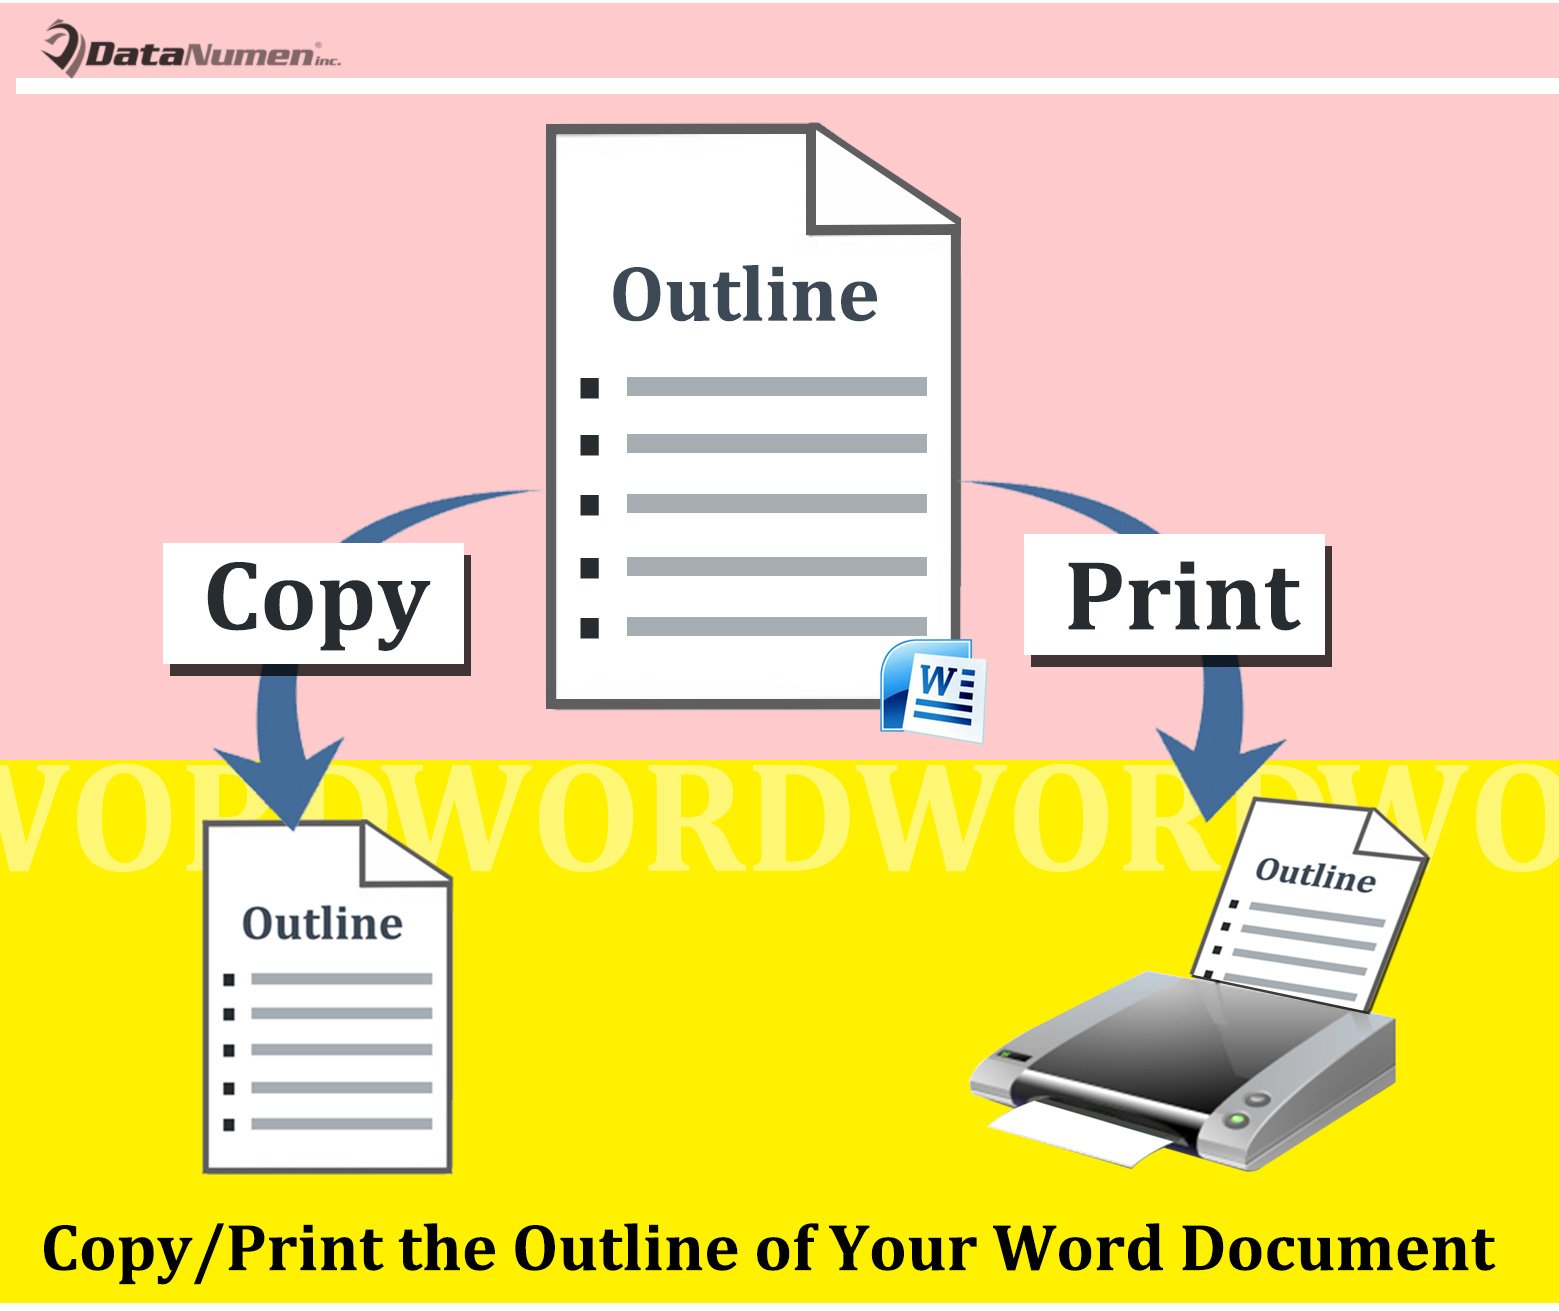 Copy or Print the Outline of Your Word Document